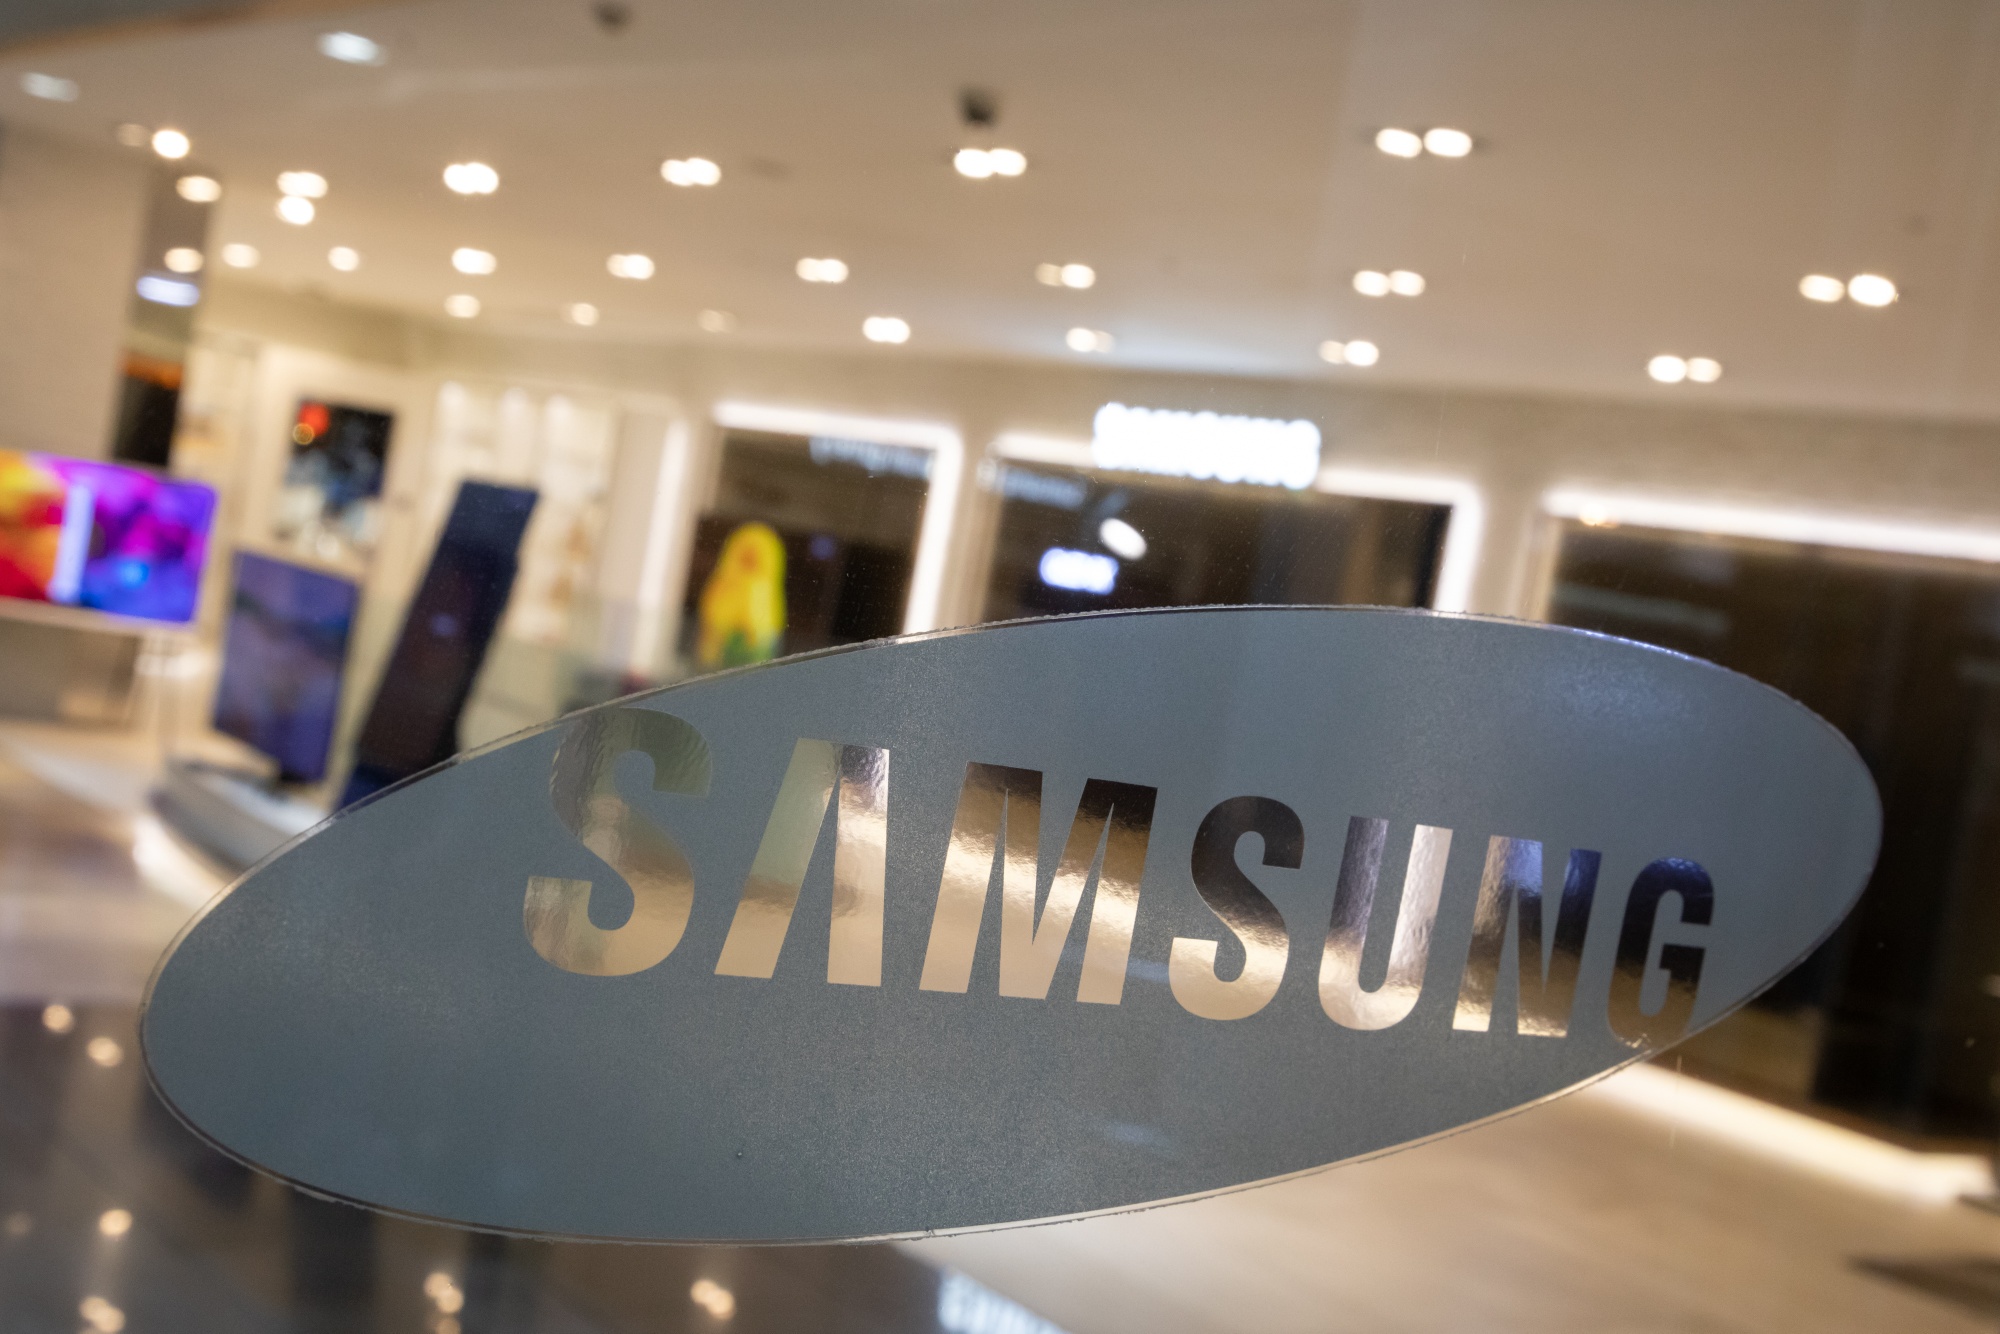 Samsung defies chip downturn with aggressive supply and capex